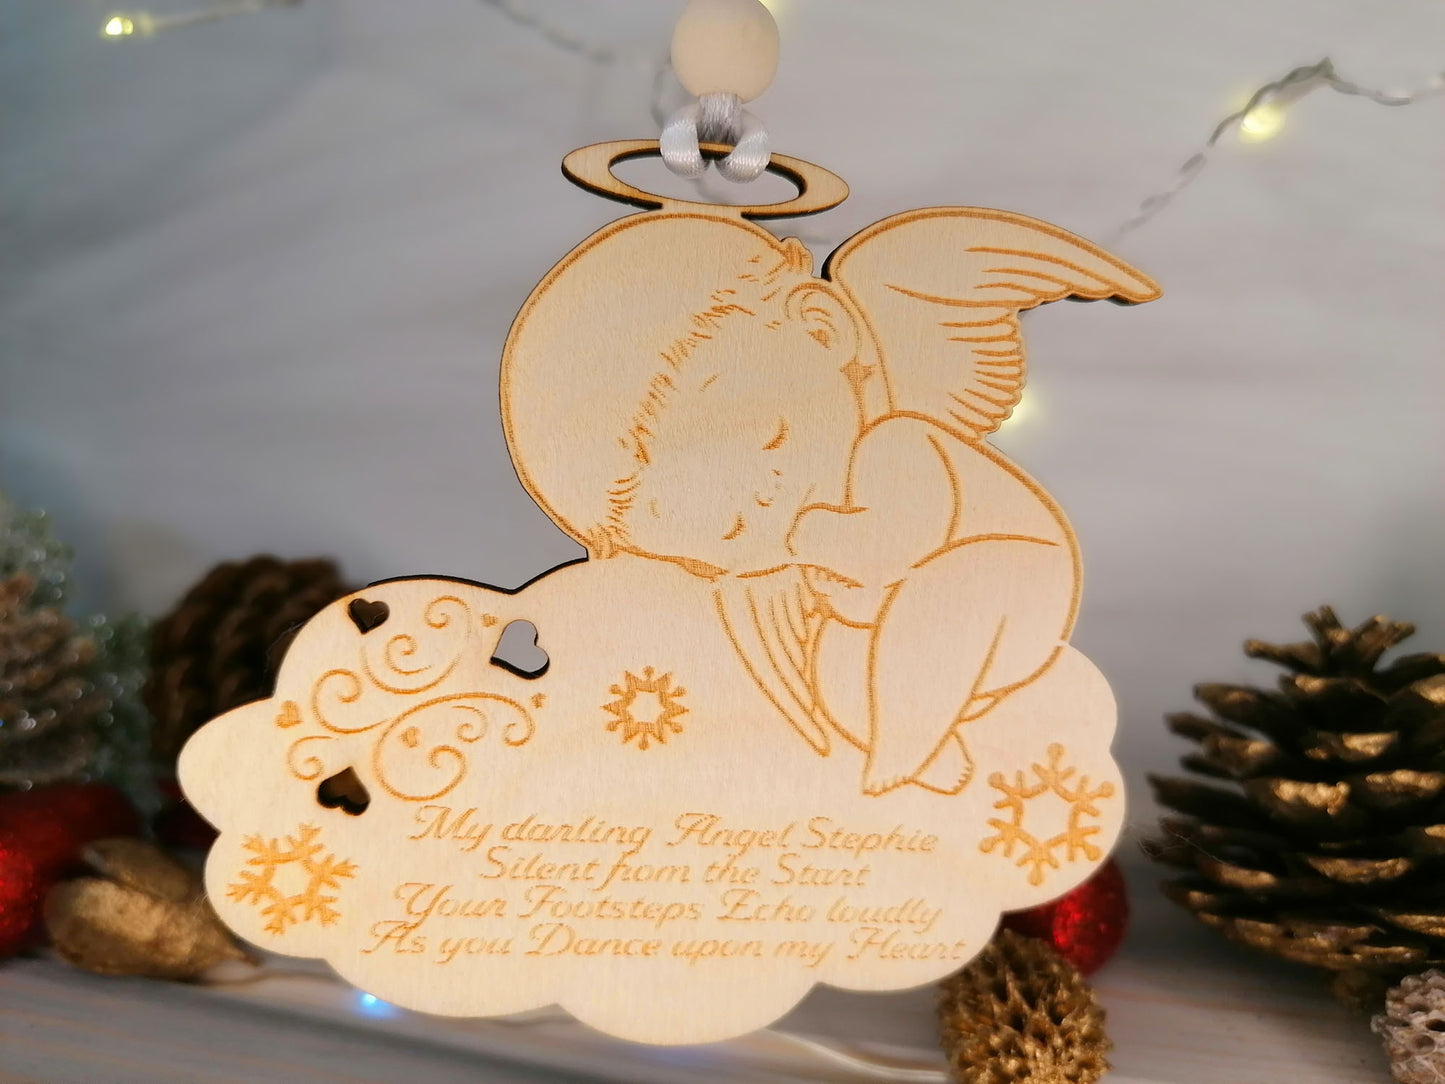 Remembrance, Memorial Sleeping angel - Christmas Ornament - PG Factory